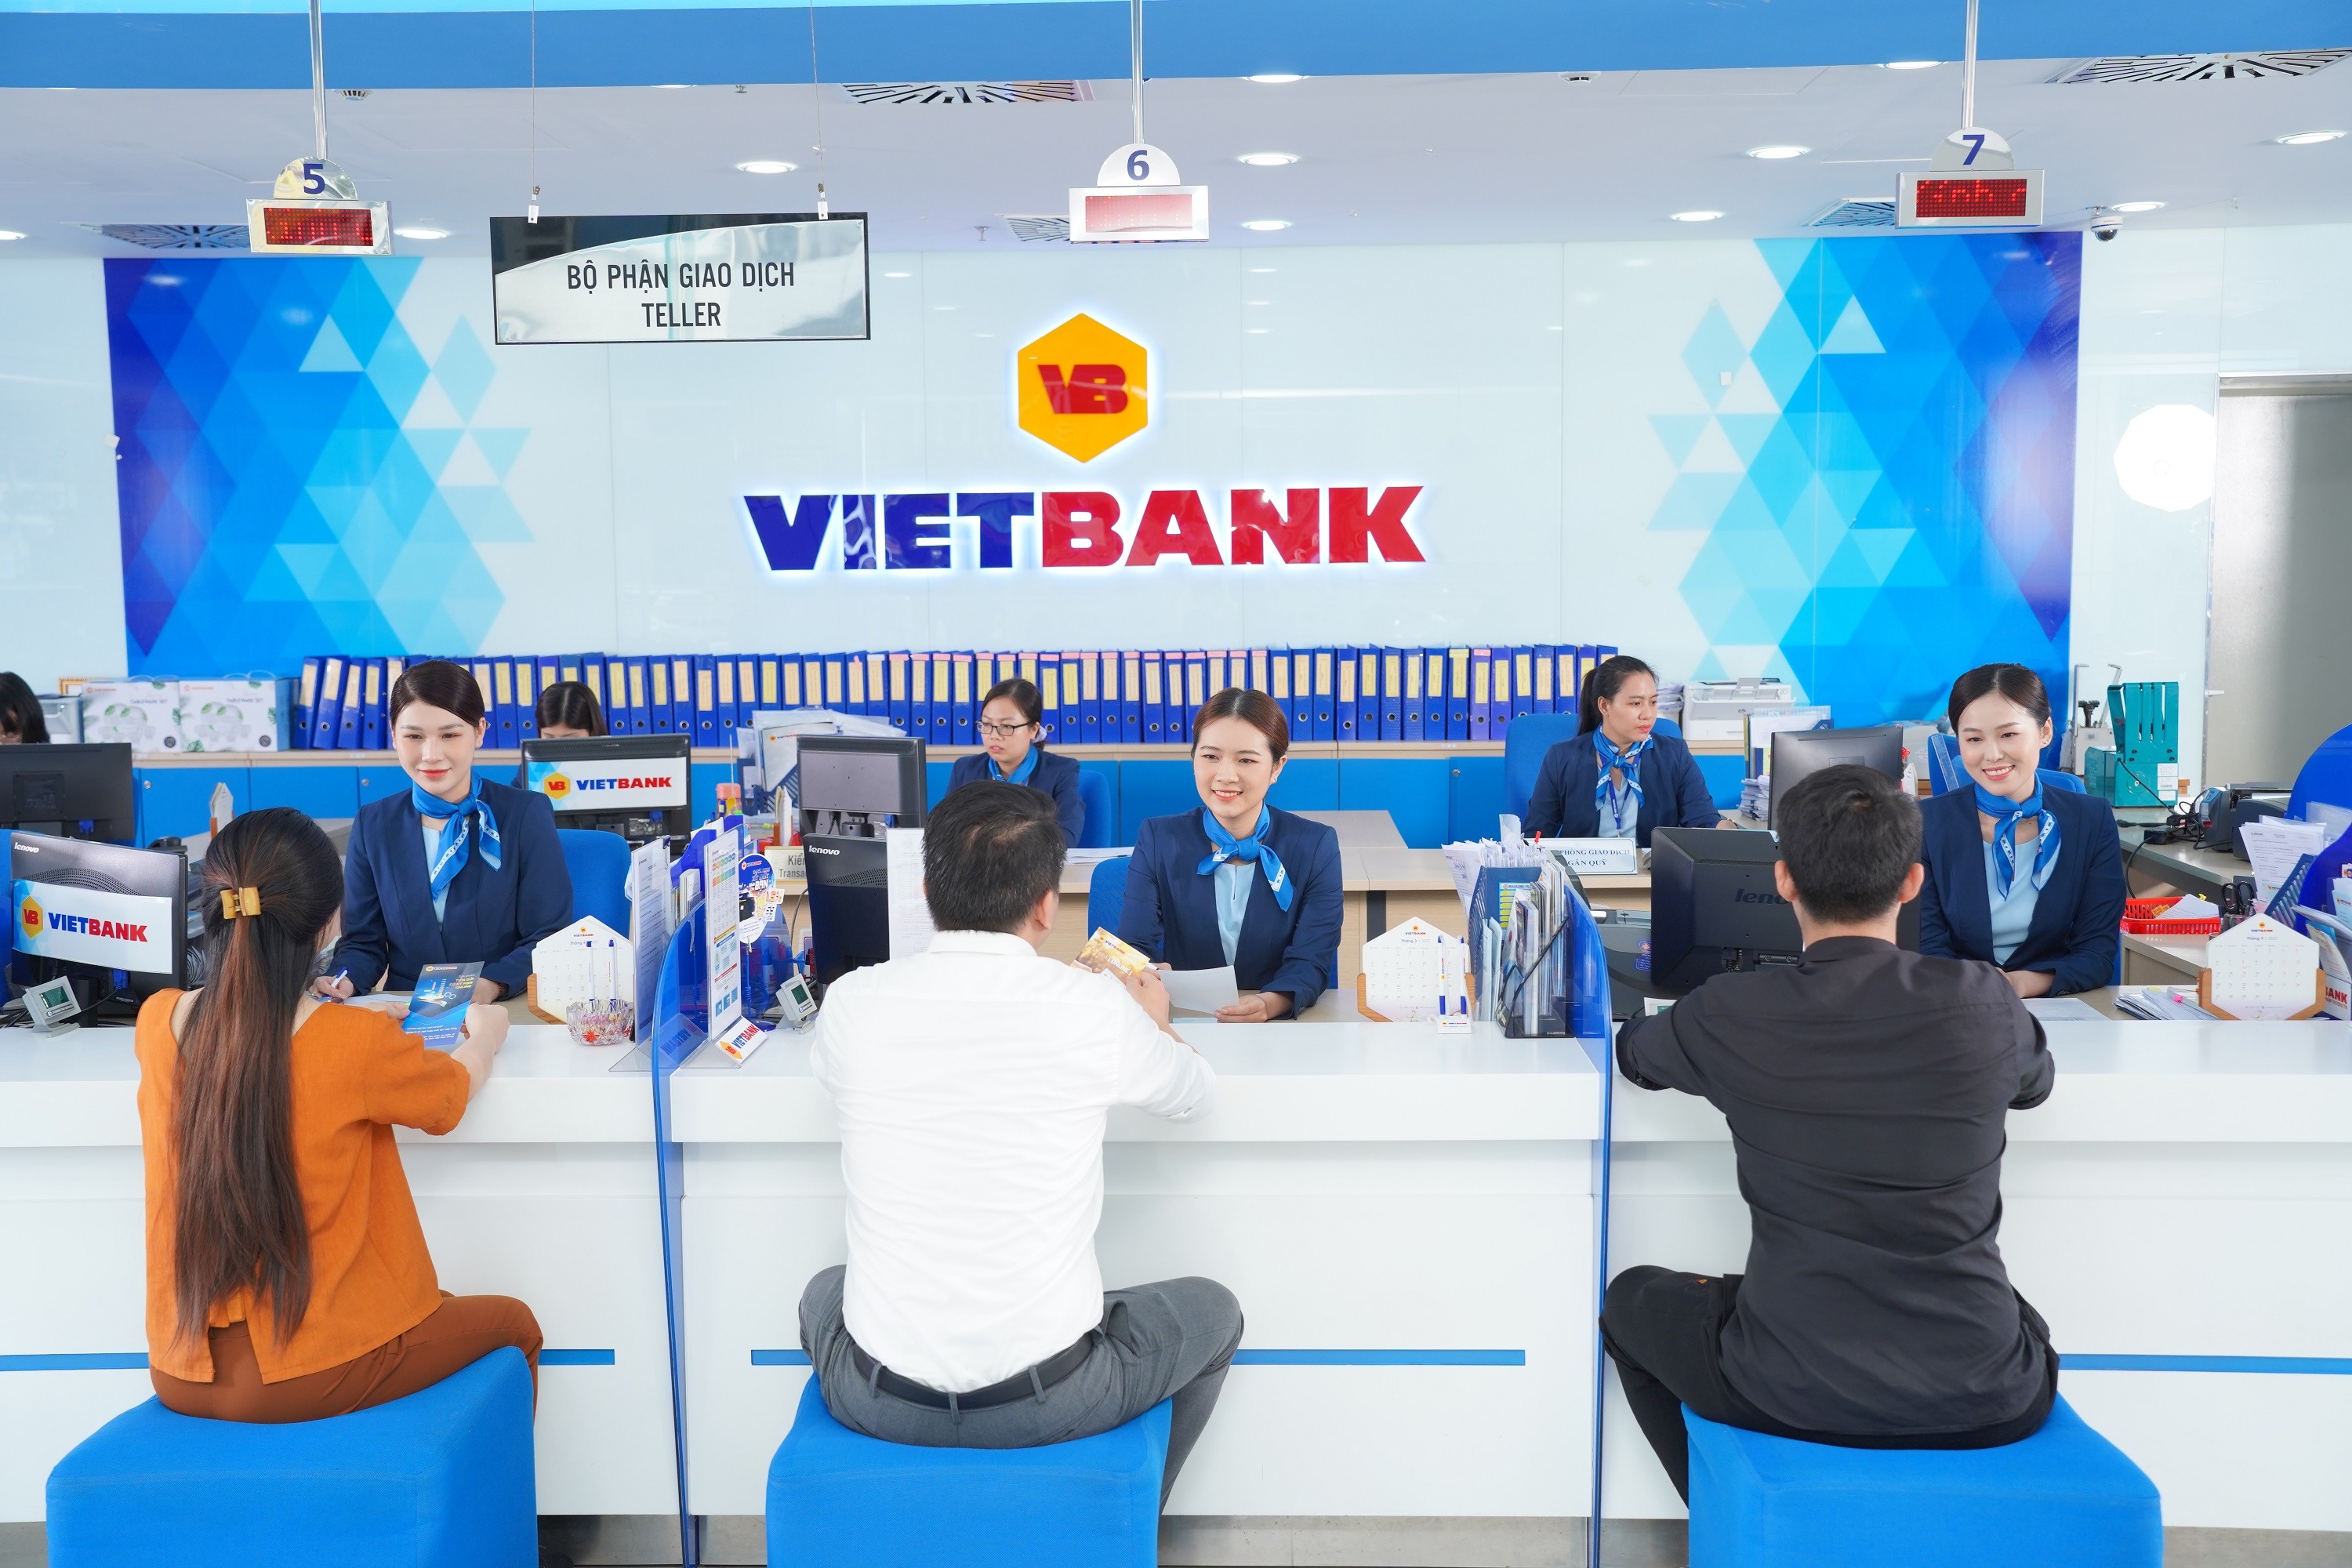 3-vietbank-canh-giao-dich-1682391499.JPG